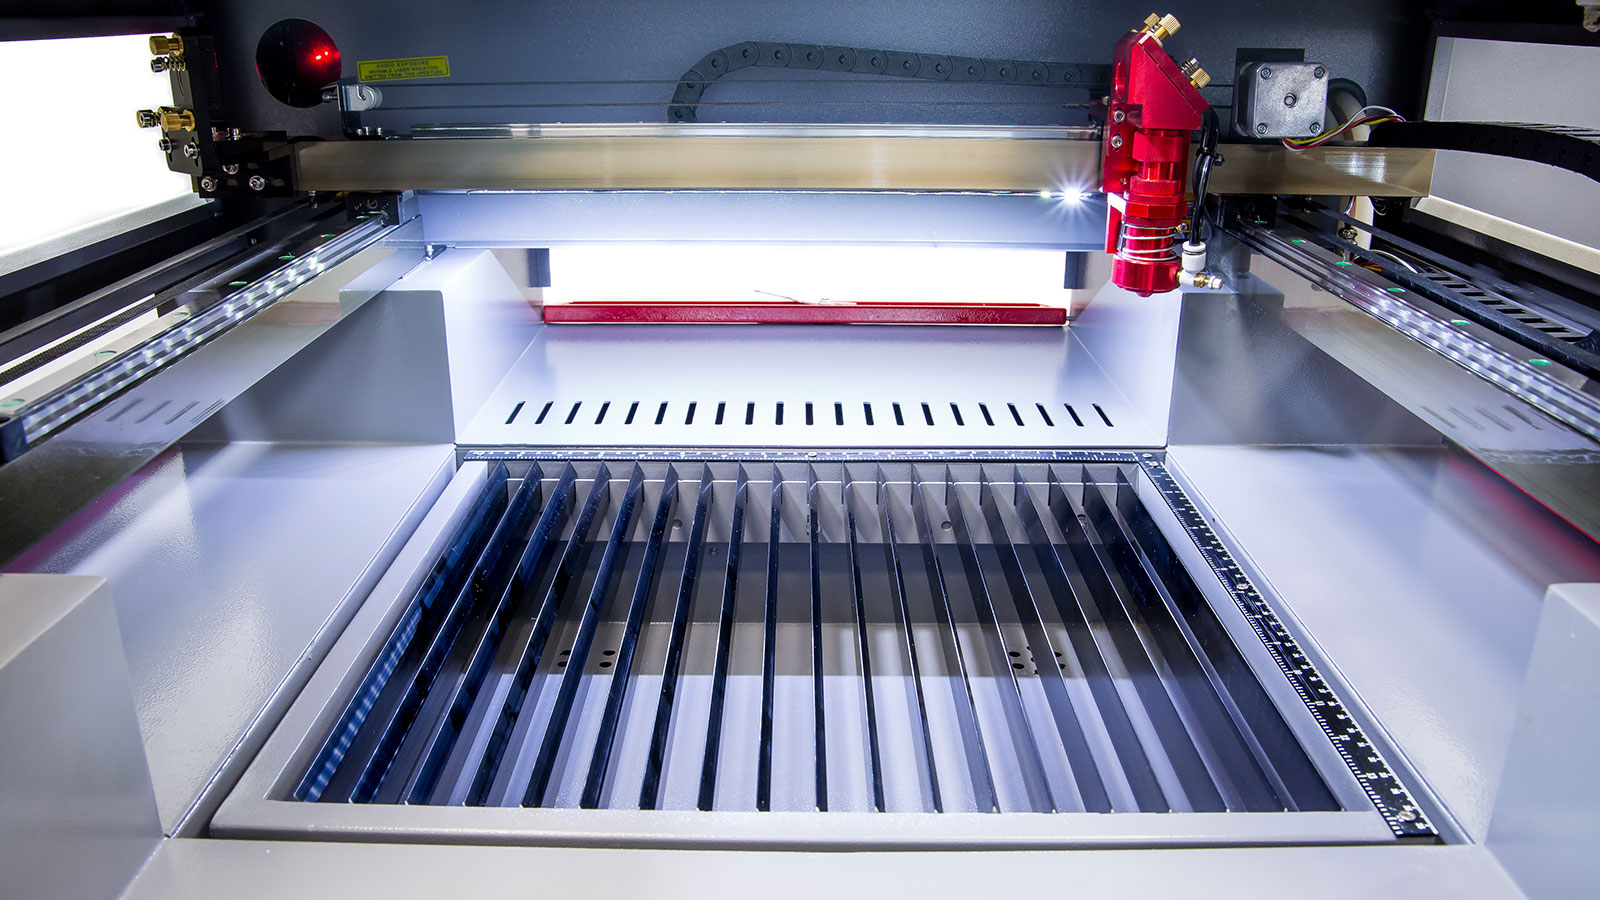 HP-3655 Co2 Laser Cutter and Engraver - Boss Laser